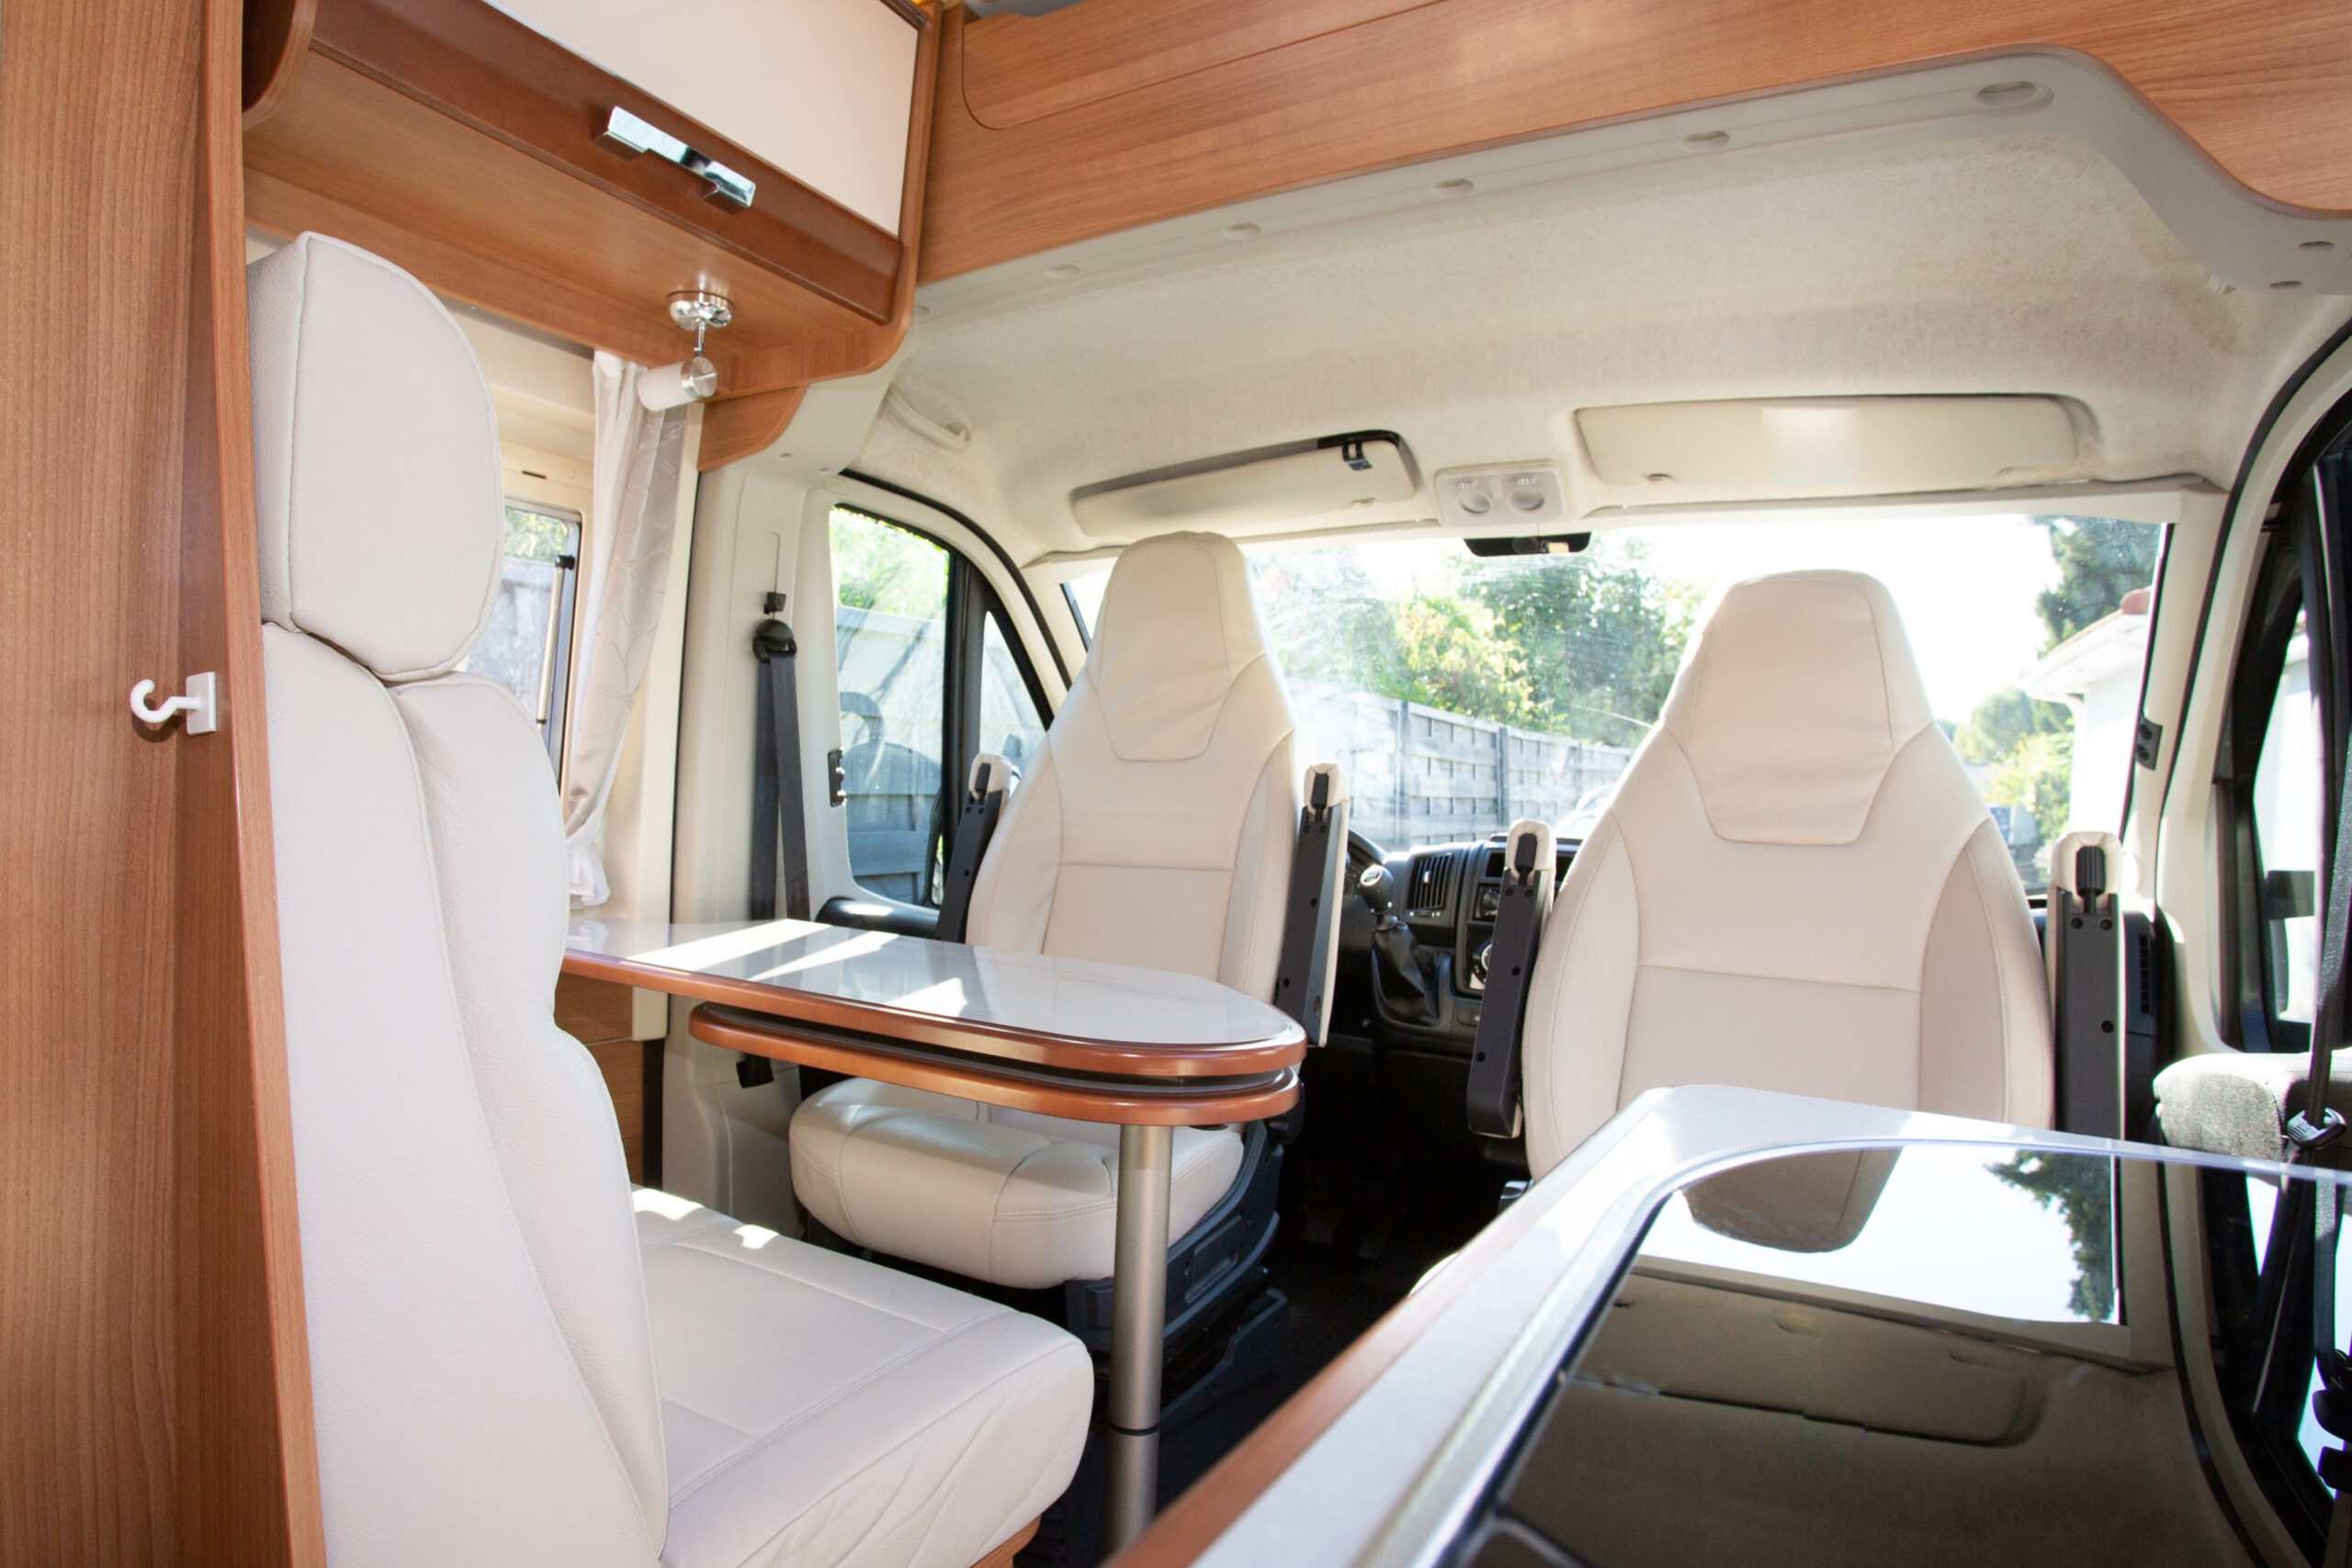 RV interior with seats - feature image for musty smell in RV